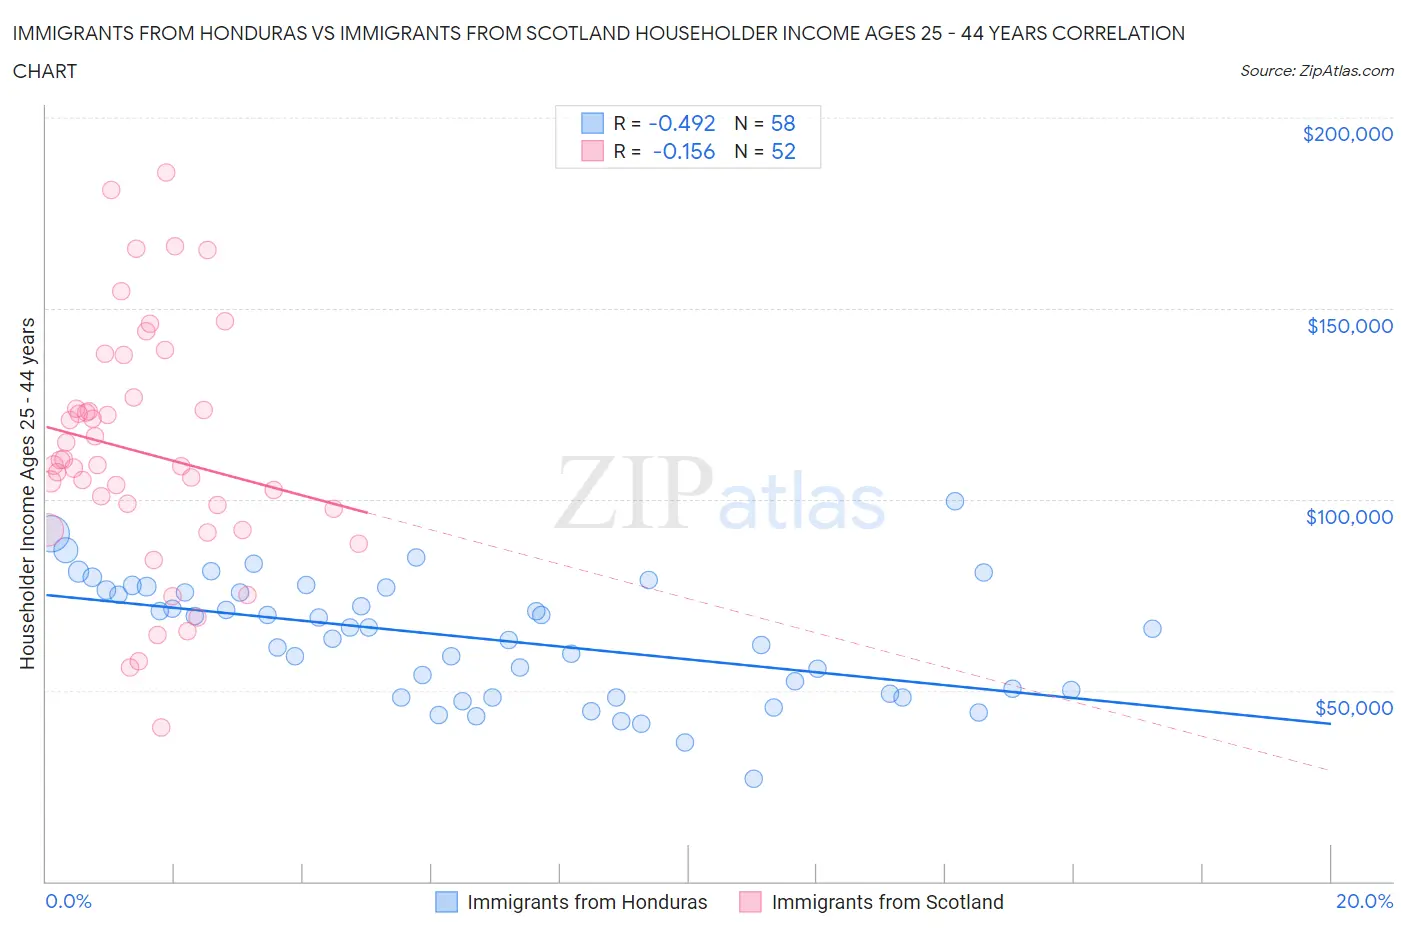 Immigrants from Honduras vs Immigrants from Scotland Householder Income Ages 25 - 44 years